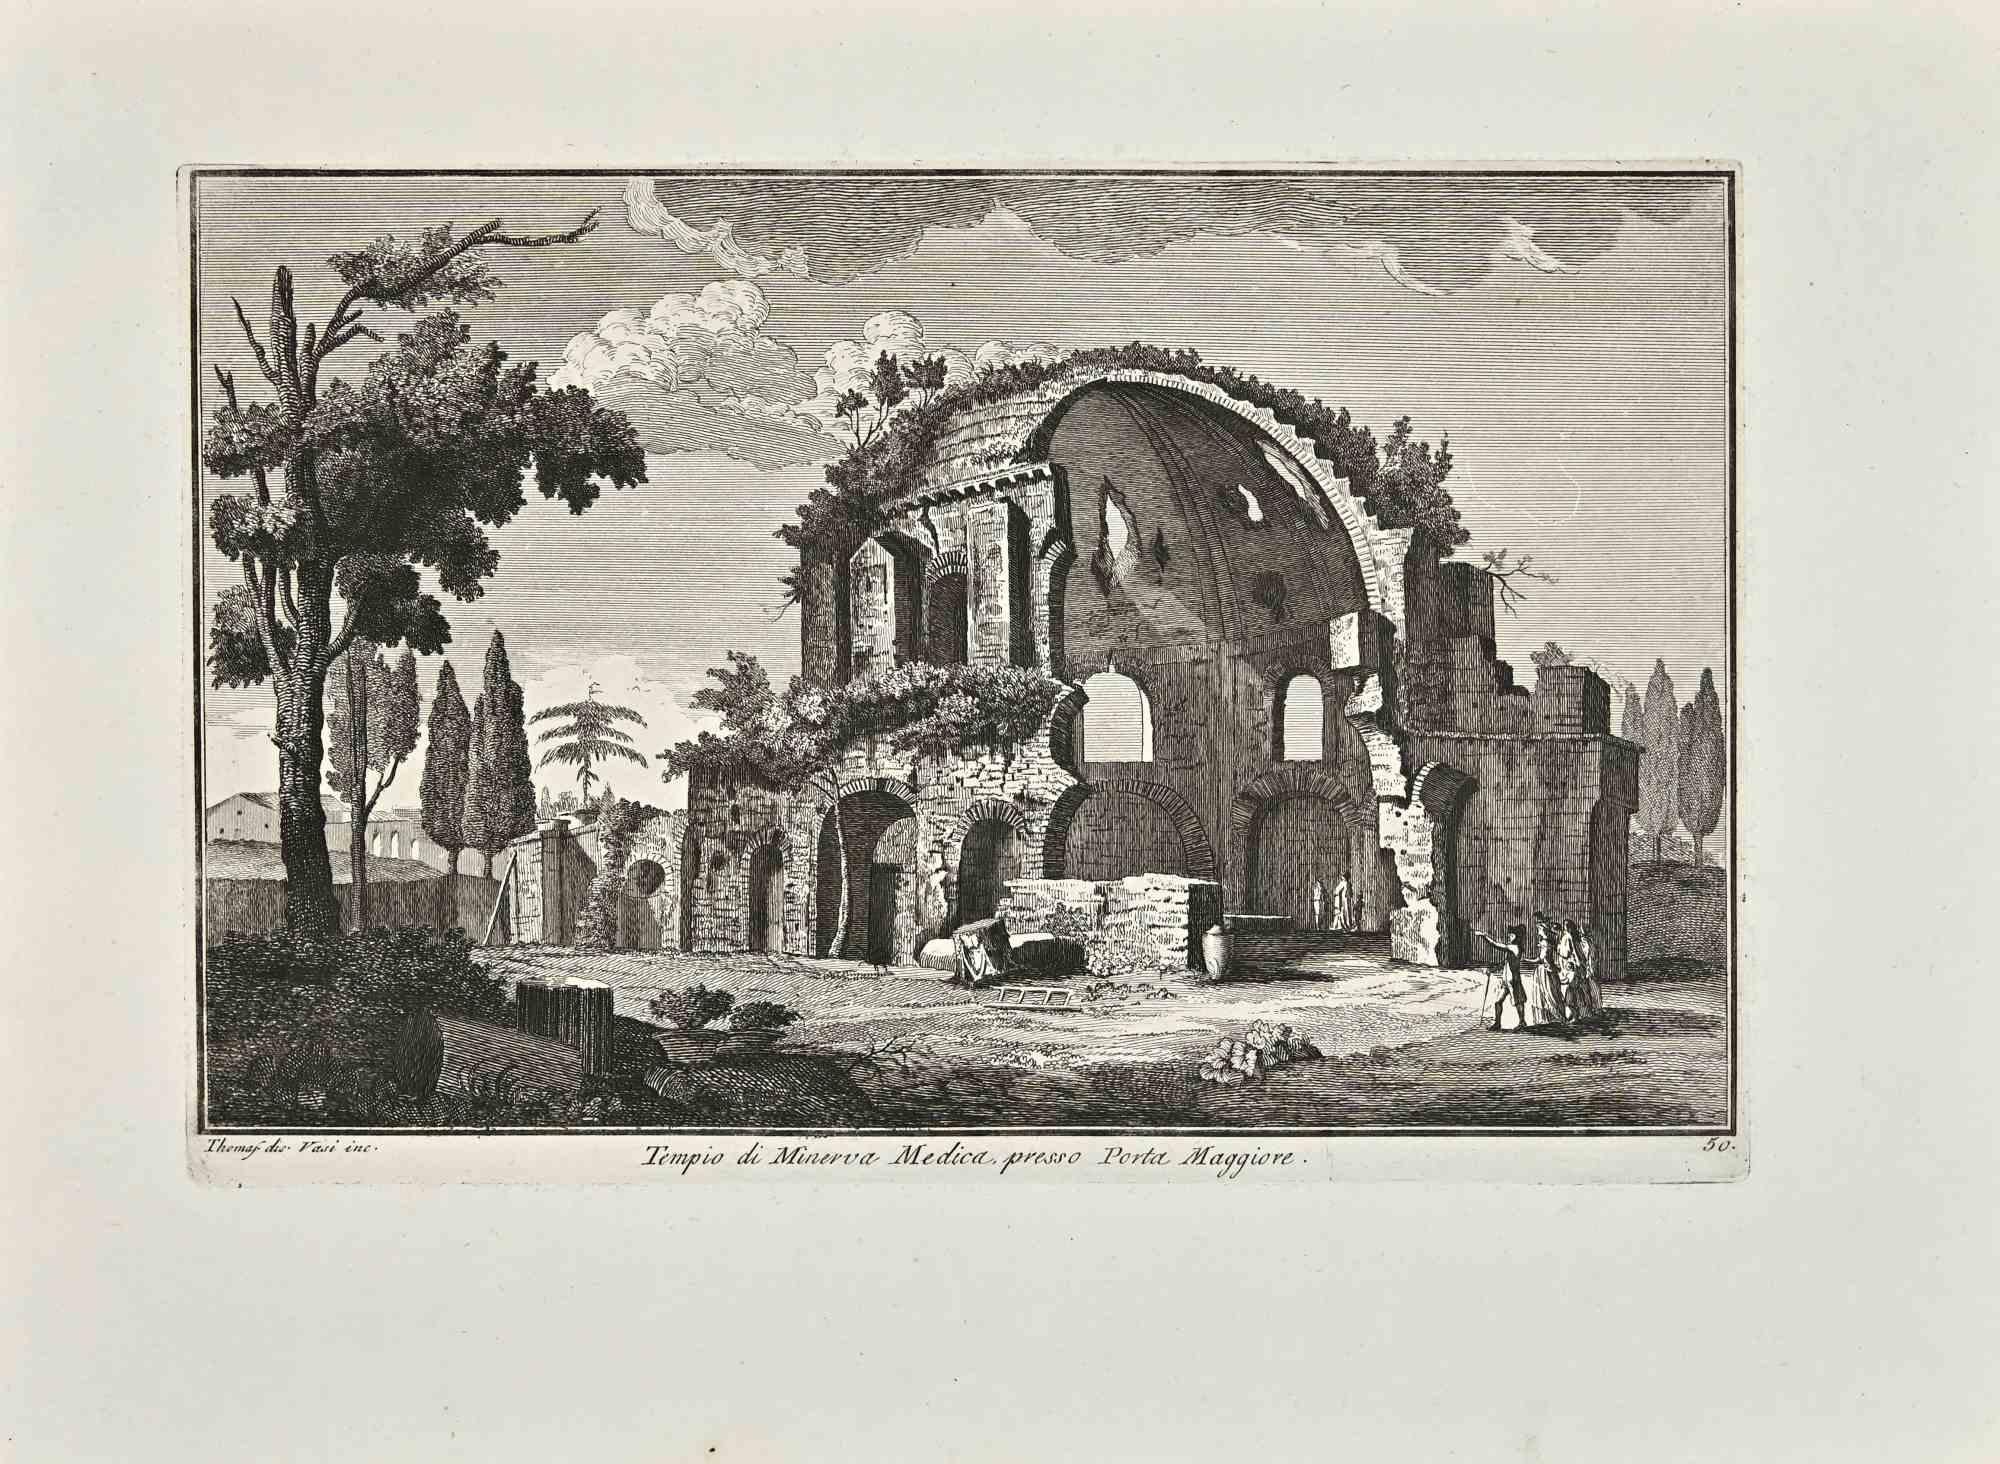 Tempio di Minerva Medica - Porta Maggiore is an original etching of the Late 18th century realized by Giuseppe Vasi.

Signed and titled on plate lower margin. 

Good conditions.

Giuseppe Vasi  (Corleone,1710 - Rome, 1782) was an engraver,